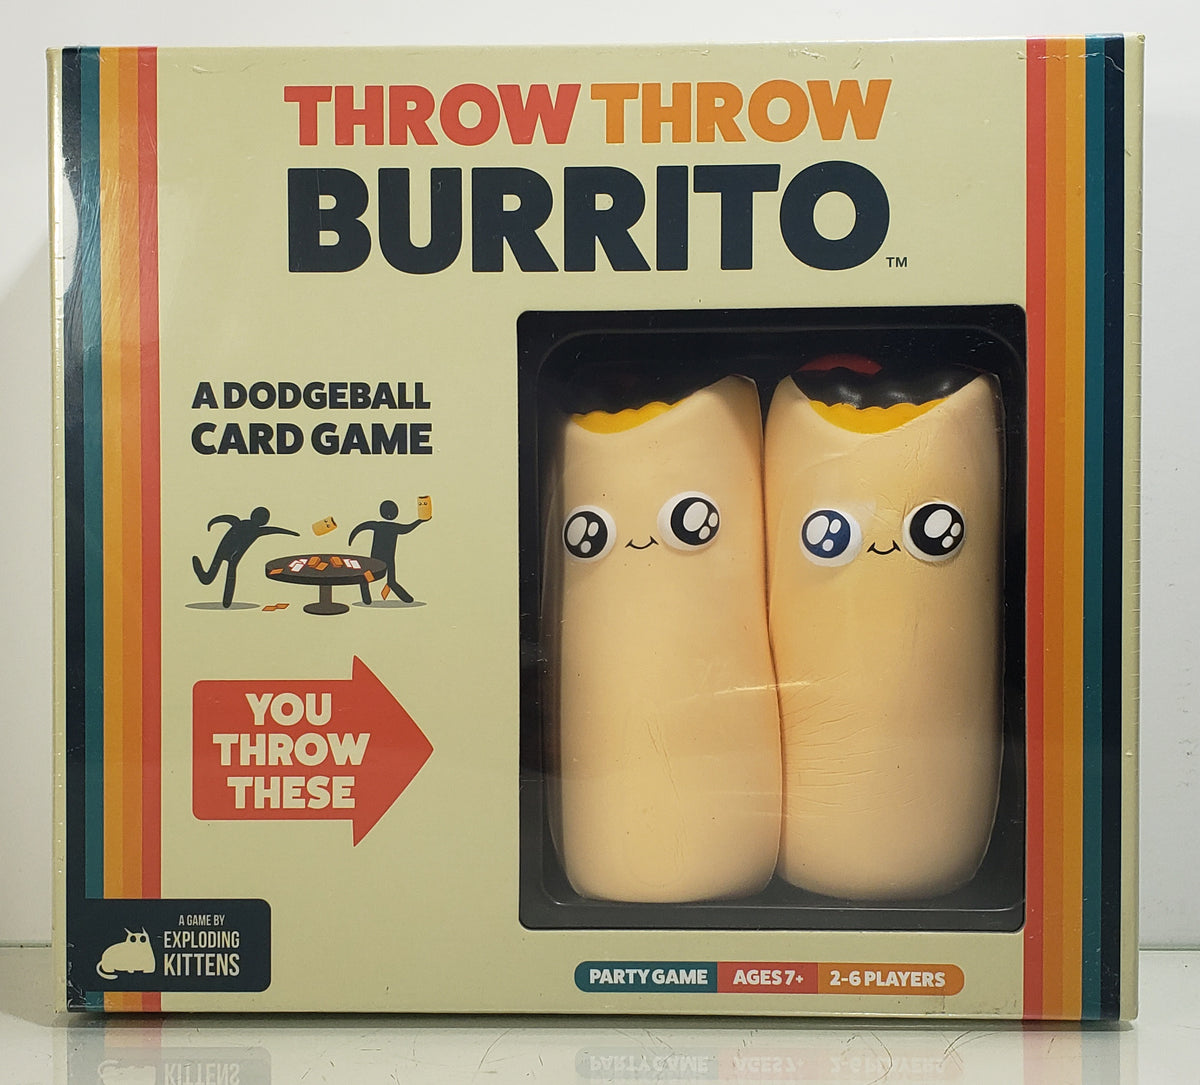 Throw Throw Burrito by - A Dodgeball Card Game – Masolut Superstore